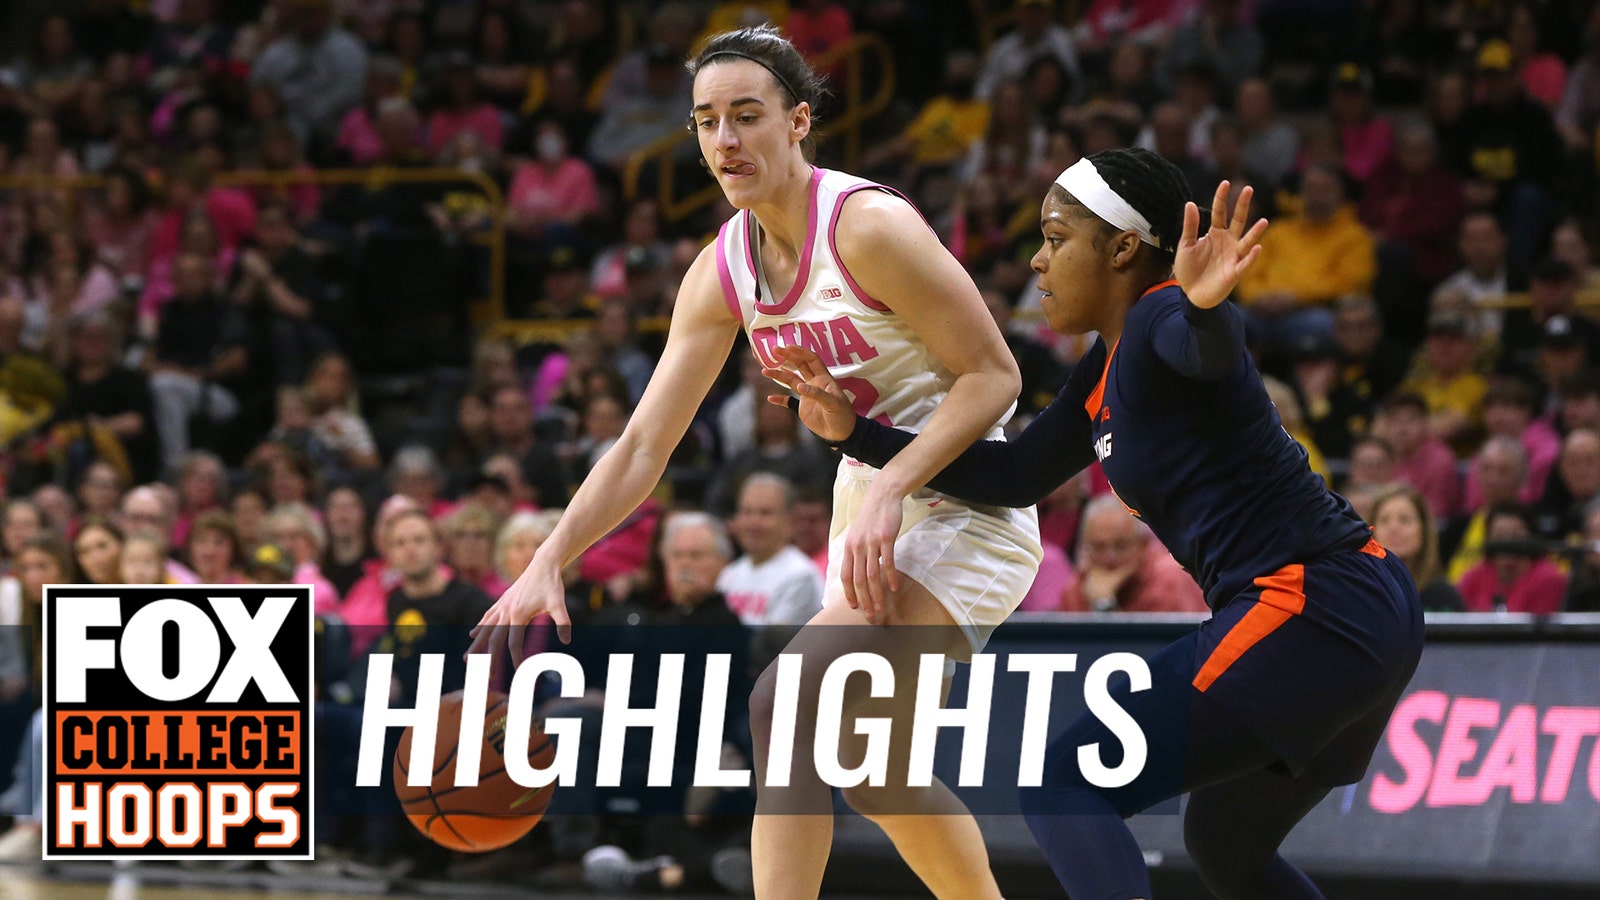 Caitlin Clark puts up a 24-point triple-double in Iowa's win over Illinois